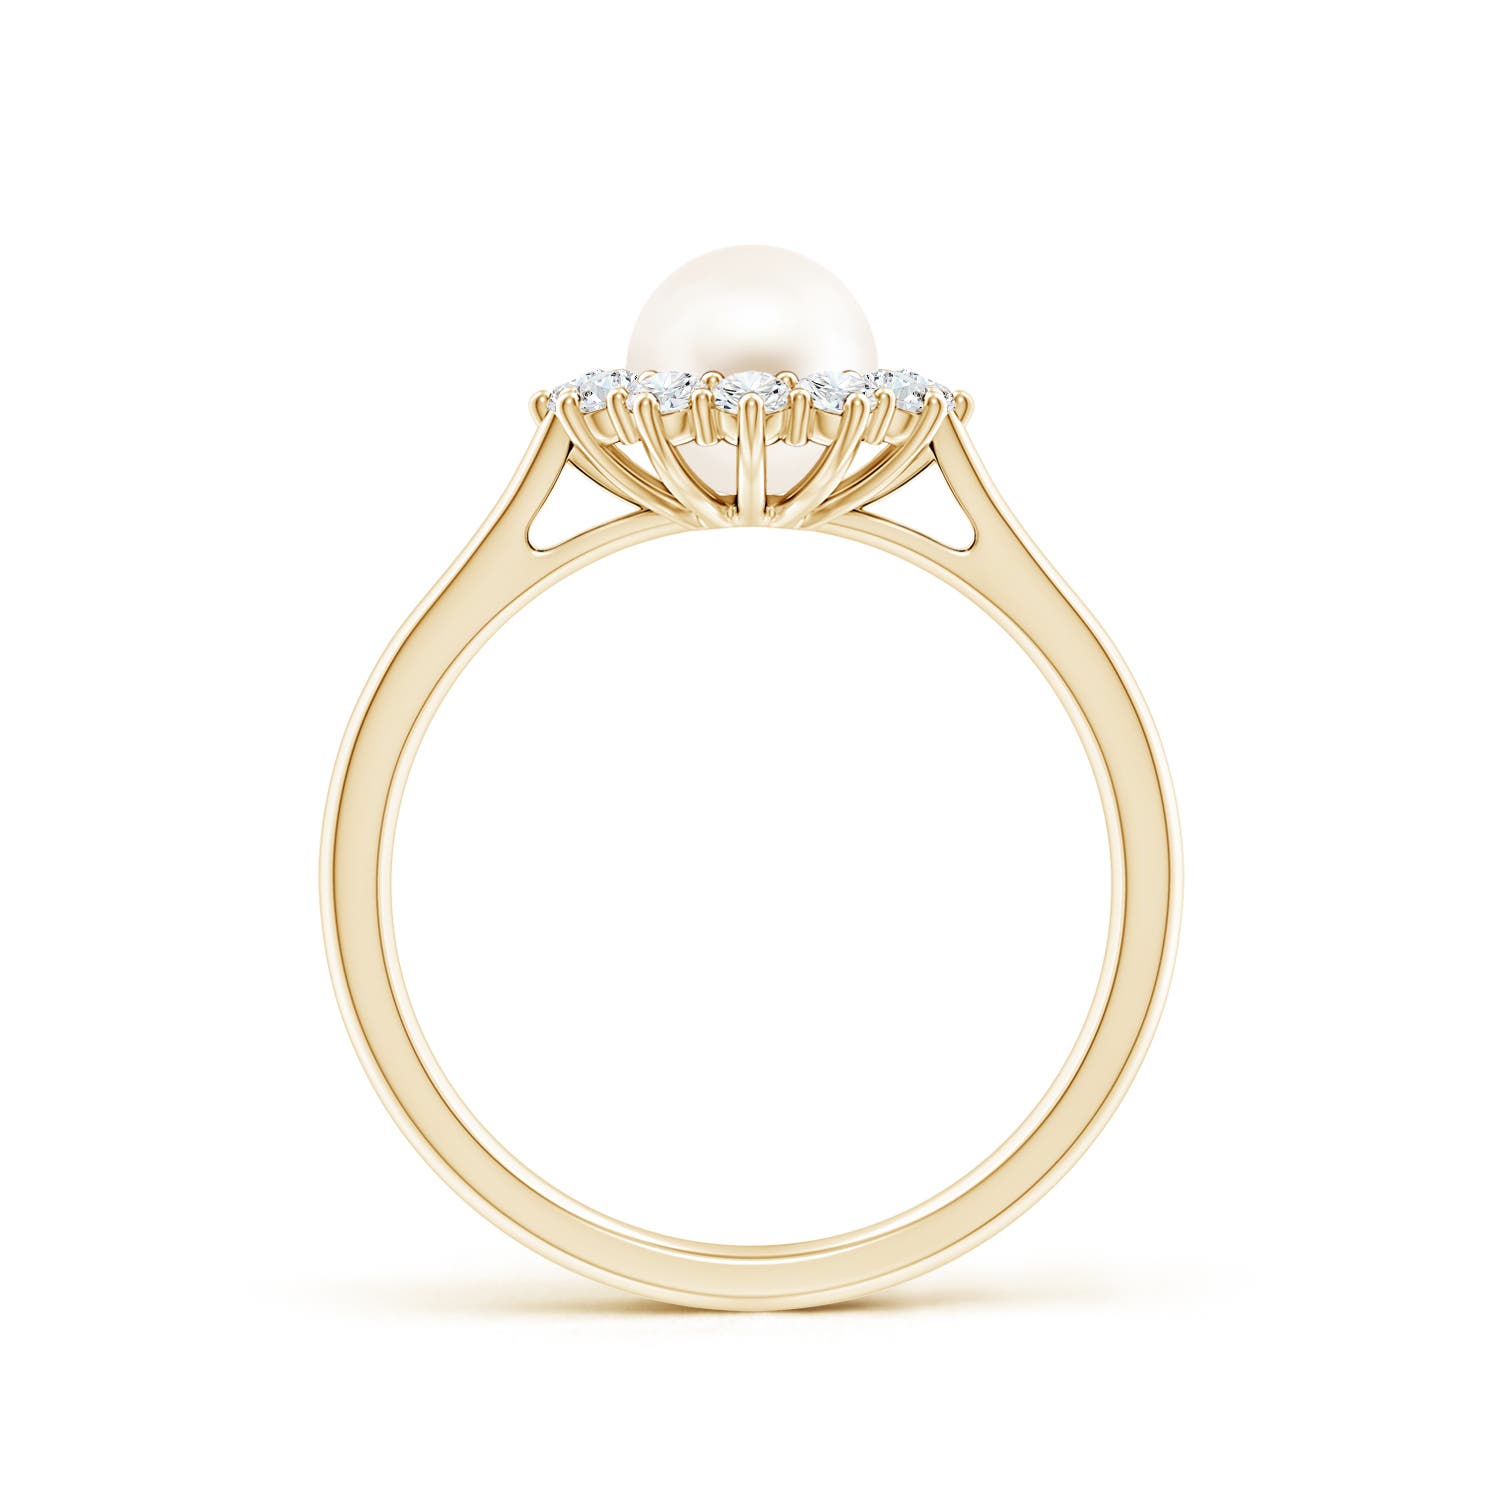 AAA / 1.88 CT / 14 KT Yellow Gold